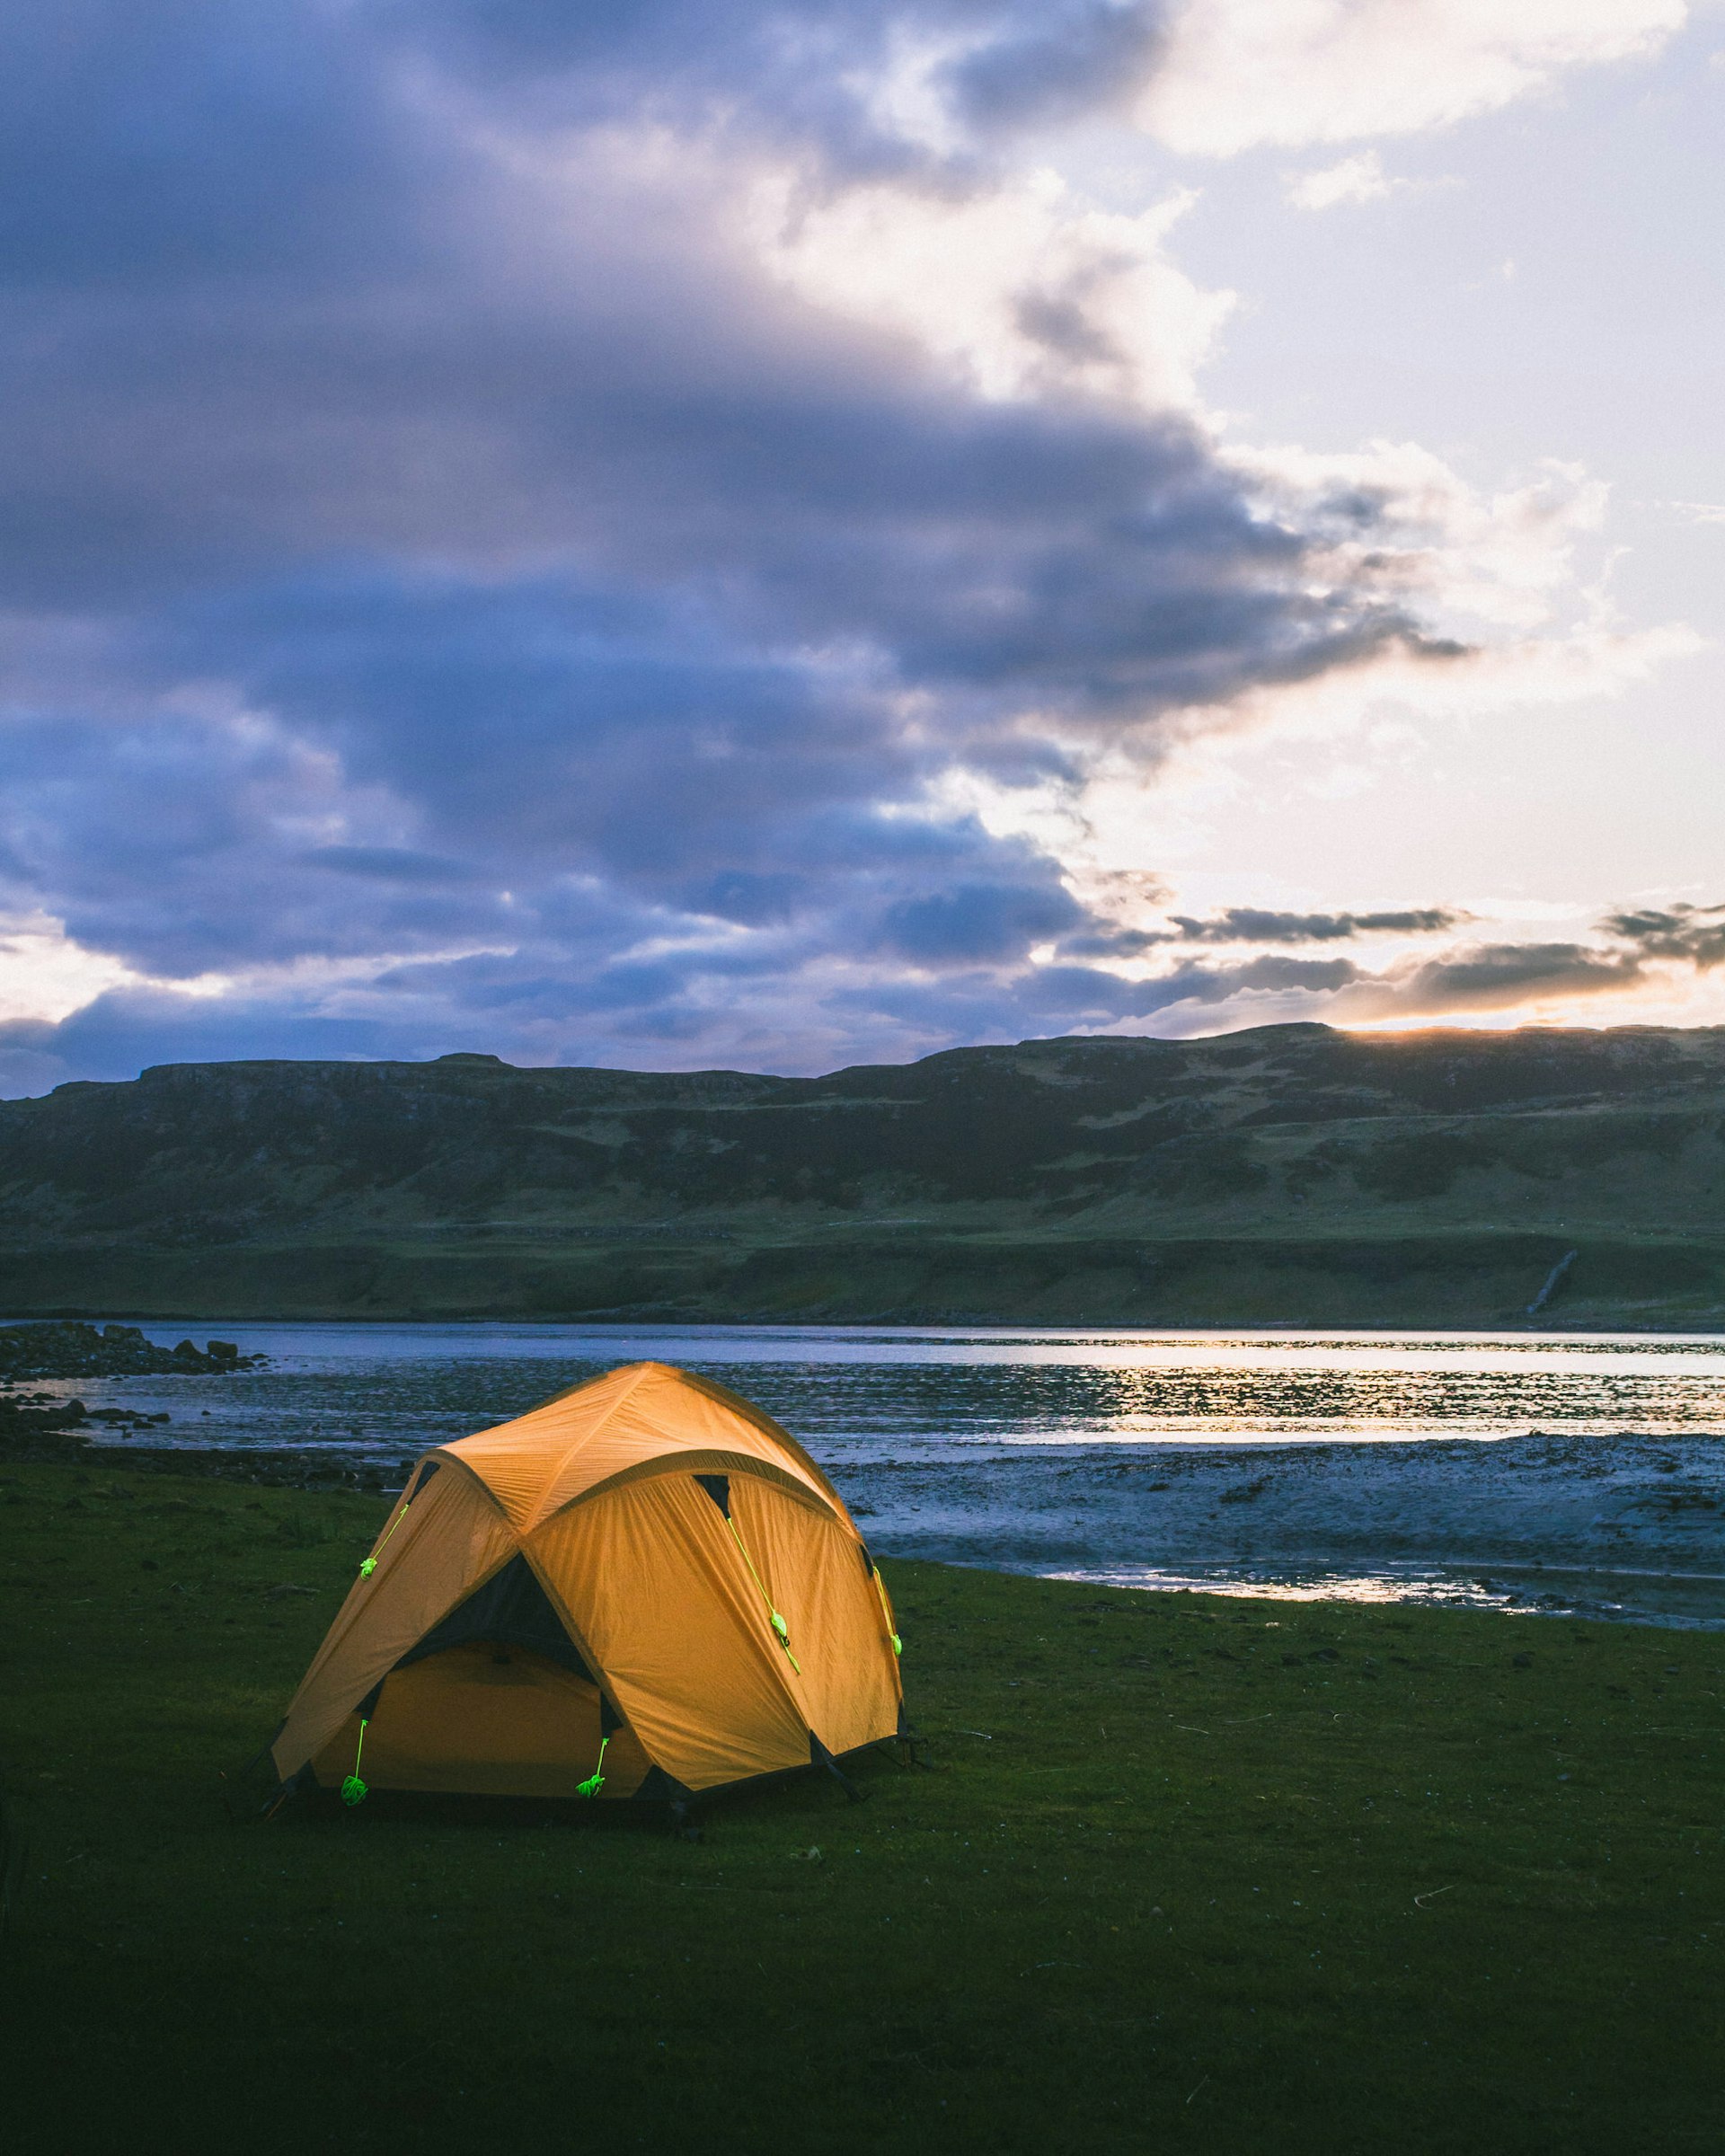  A bright yellow tent has been pitched on grassland just behind a shoreline. It's dusk, and the sun has just dipped below the hills in the distance.